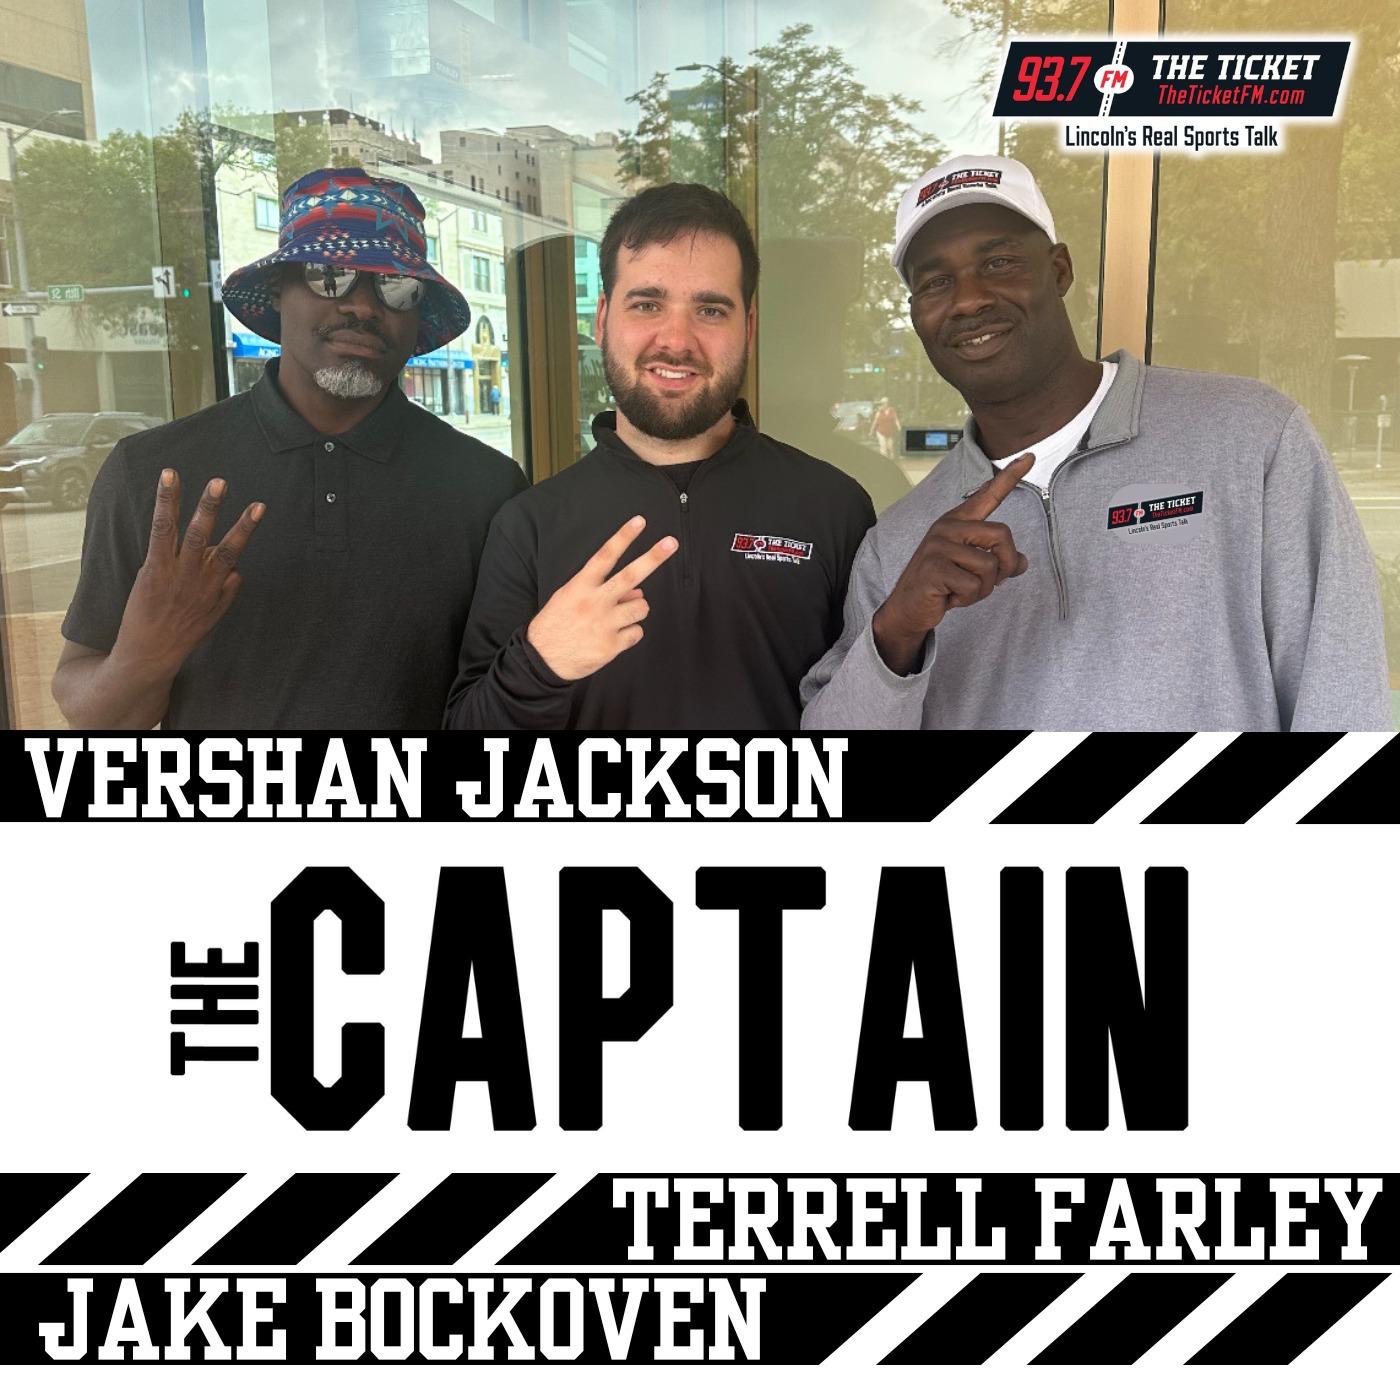 The Captain w/ Vershan Jackson, Terrell Farley, and Bock– 93.7 The Ticket KNTK